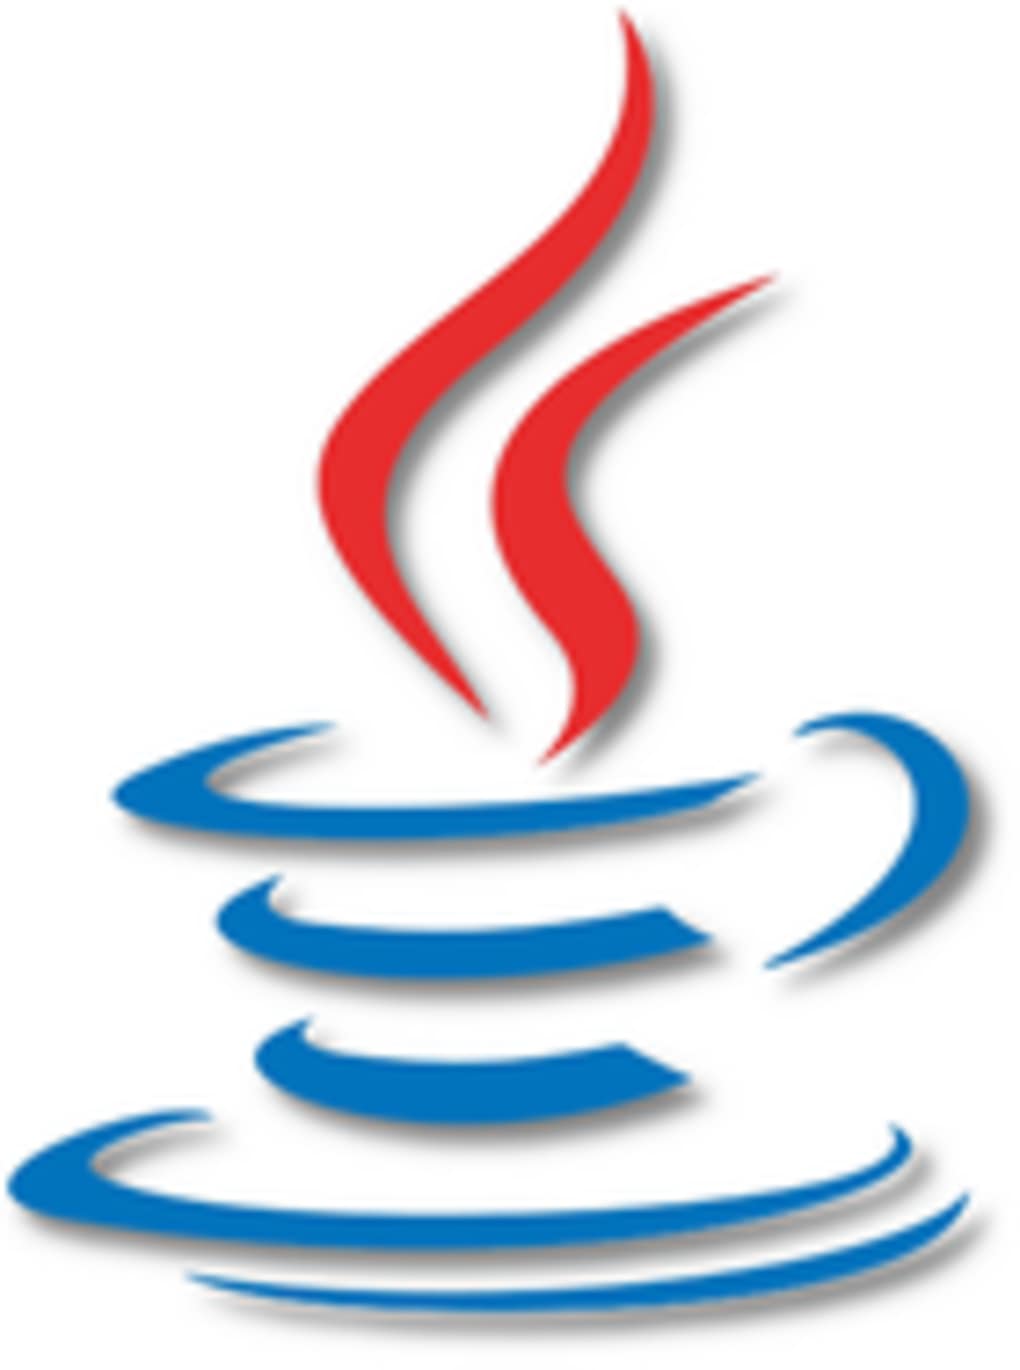 java for for mac